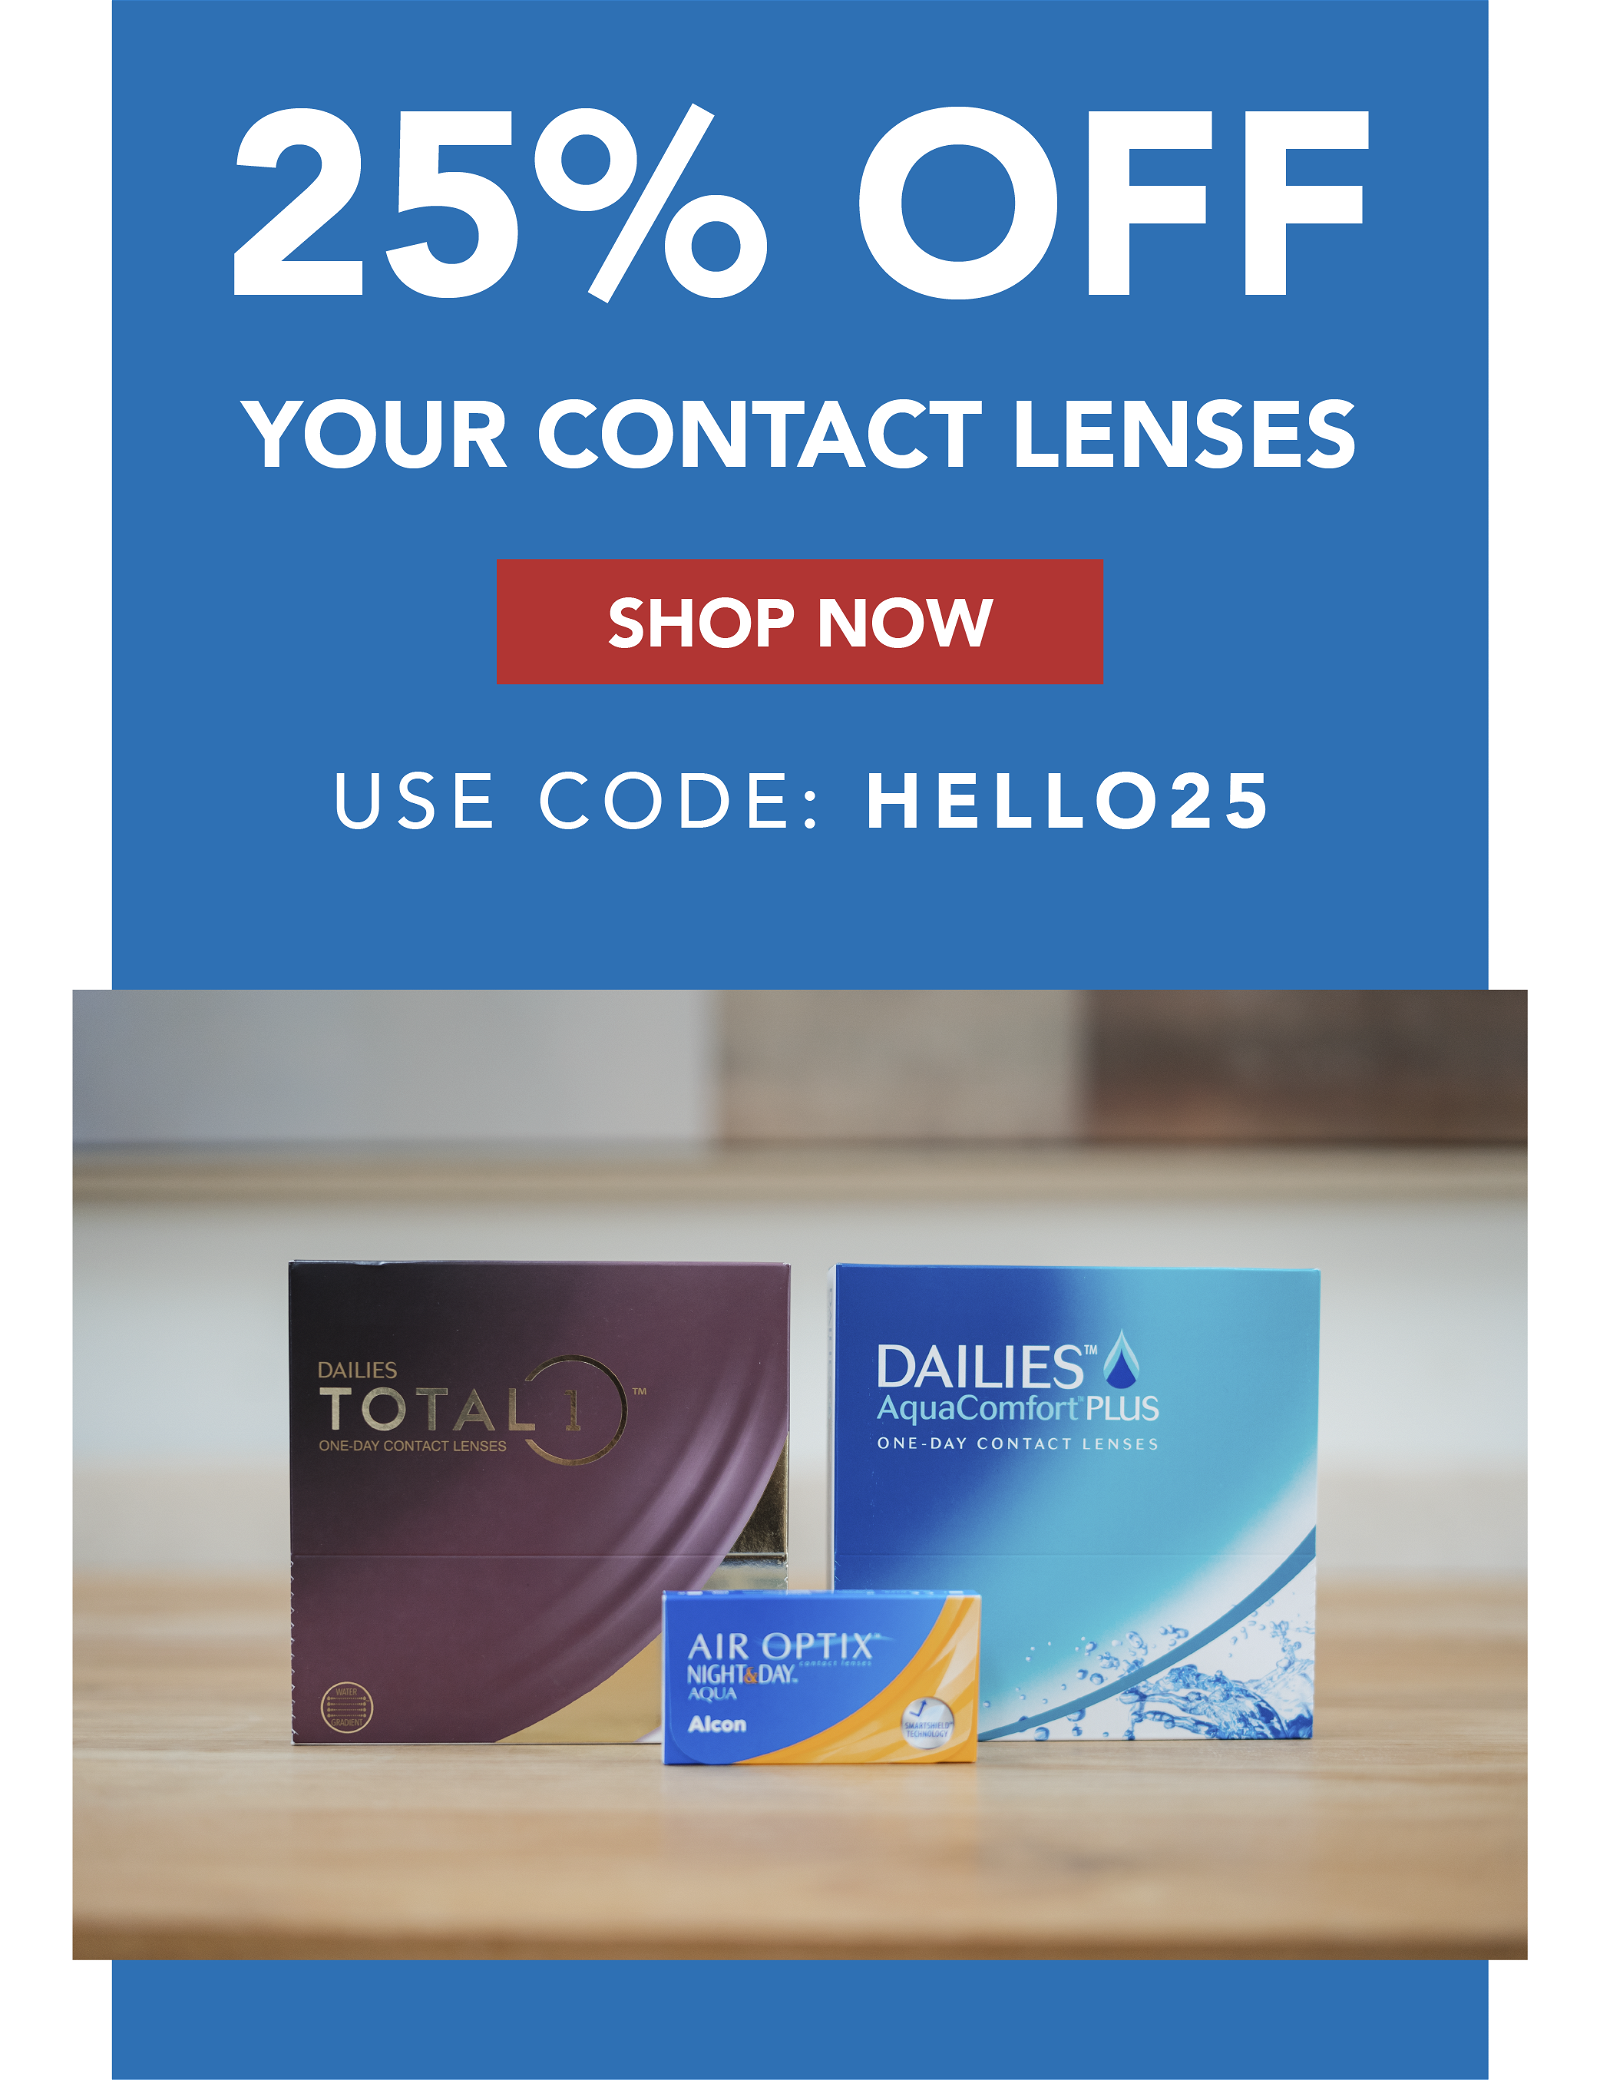 Save BIG on Your Contact Lenses Milled